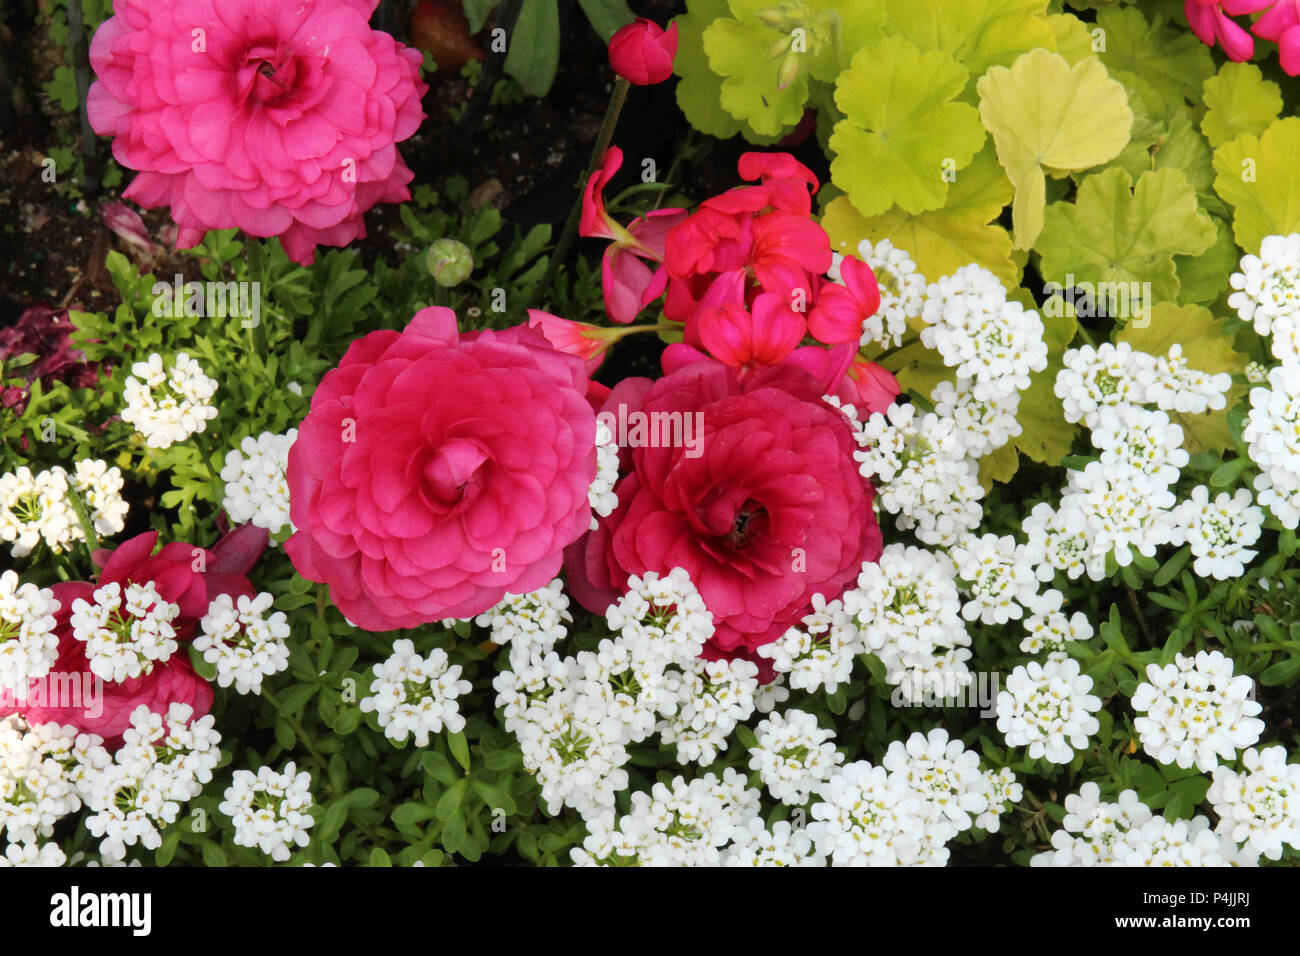 Pink Ranunculus, white Candytuft flowers growing with light green Heucheras plants in a flower bed in spring Stock Photo